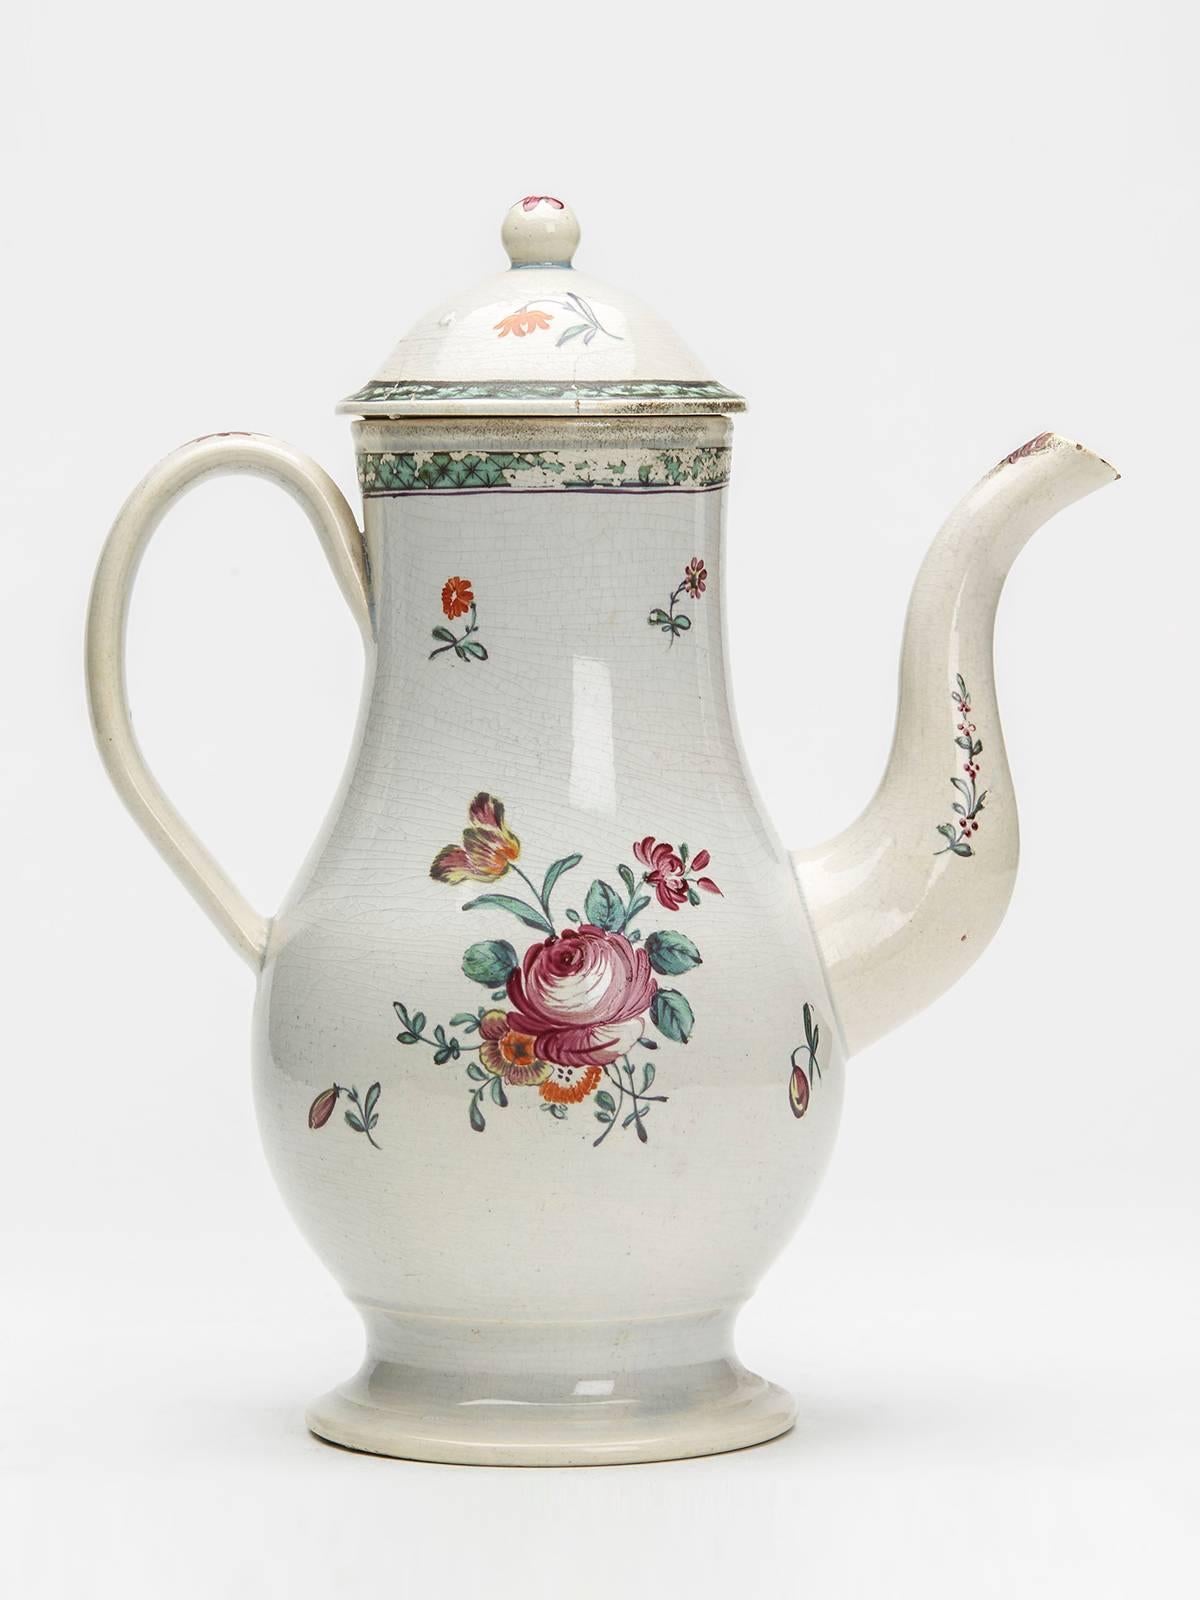 An antique Staffordshire pearlware coffee pot and cover hand-painted in coloured enamels with floral designs. This elegant and lightly potted coffee pot stands on a rounded pedestal foot with a simple loop handle, raised pouring spout and domed